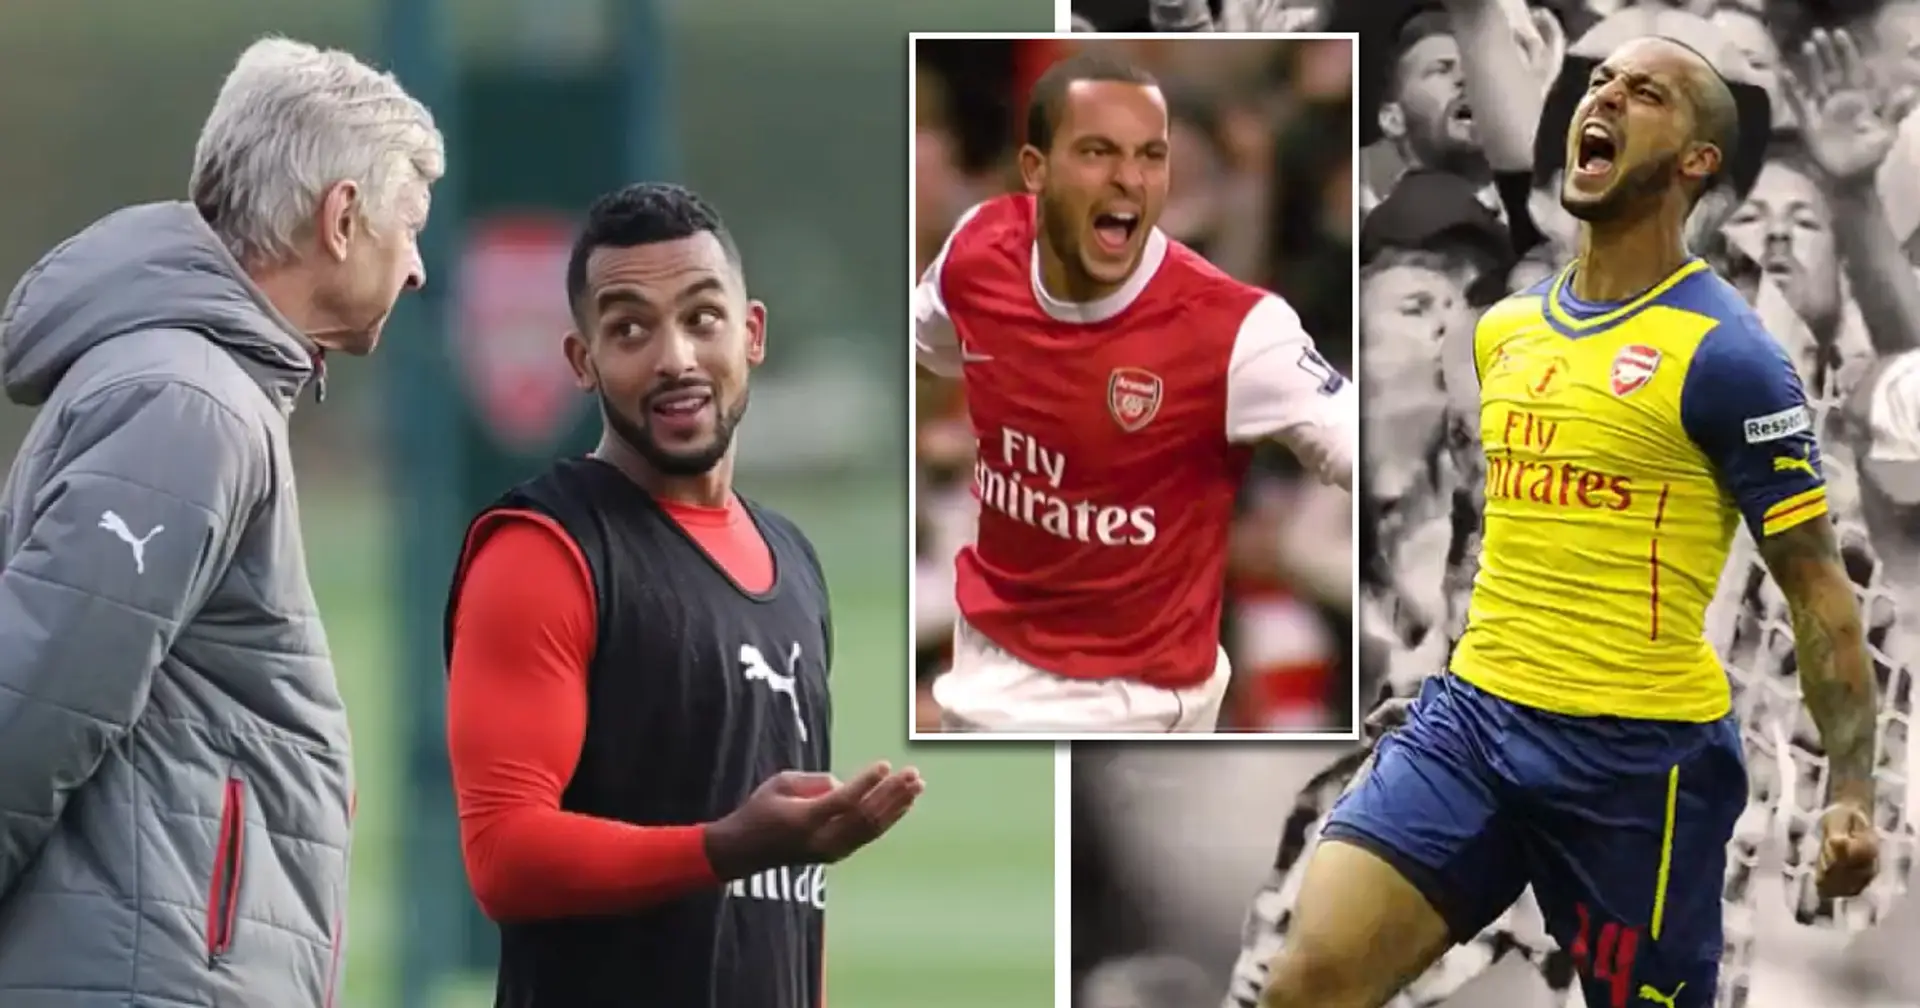 'Thank you to everyone who's been with me along the way': Theo Walcott retires from football